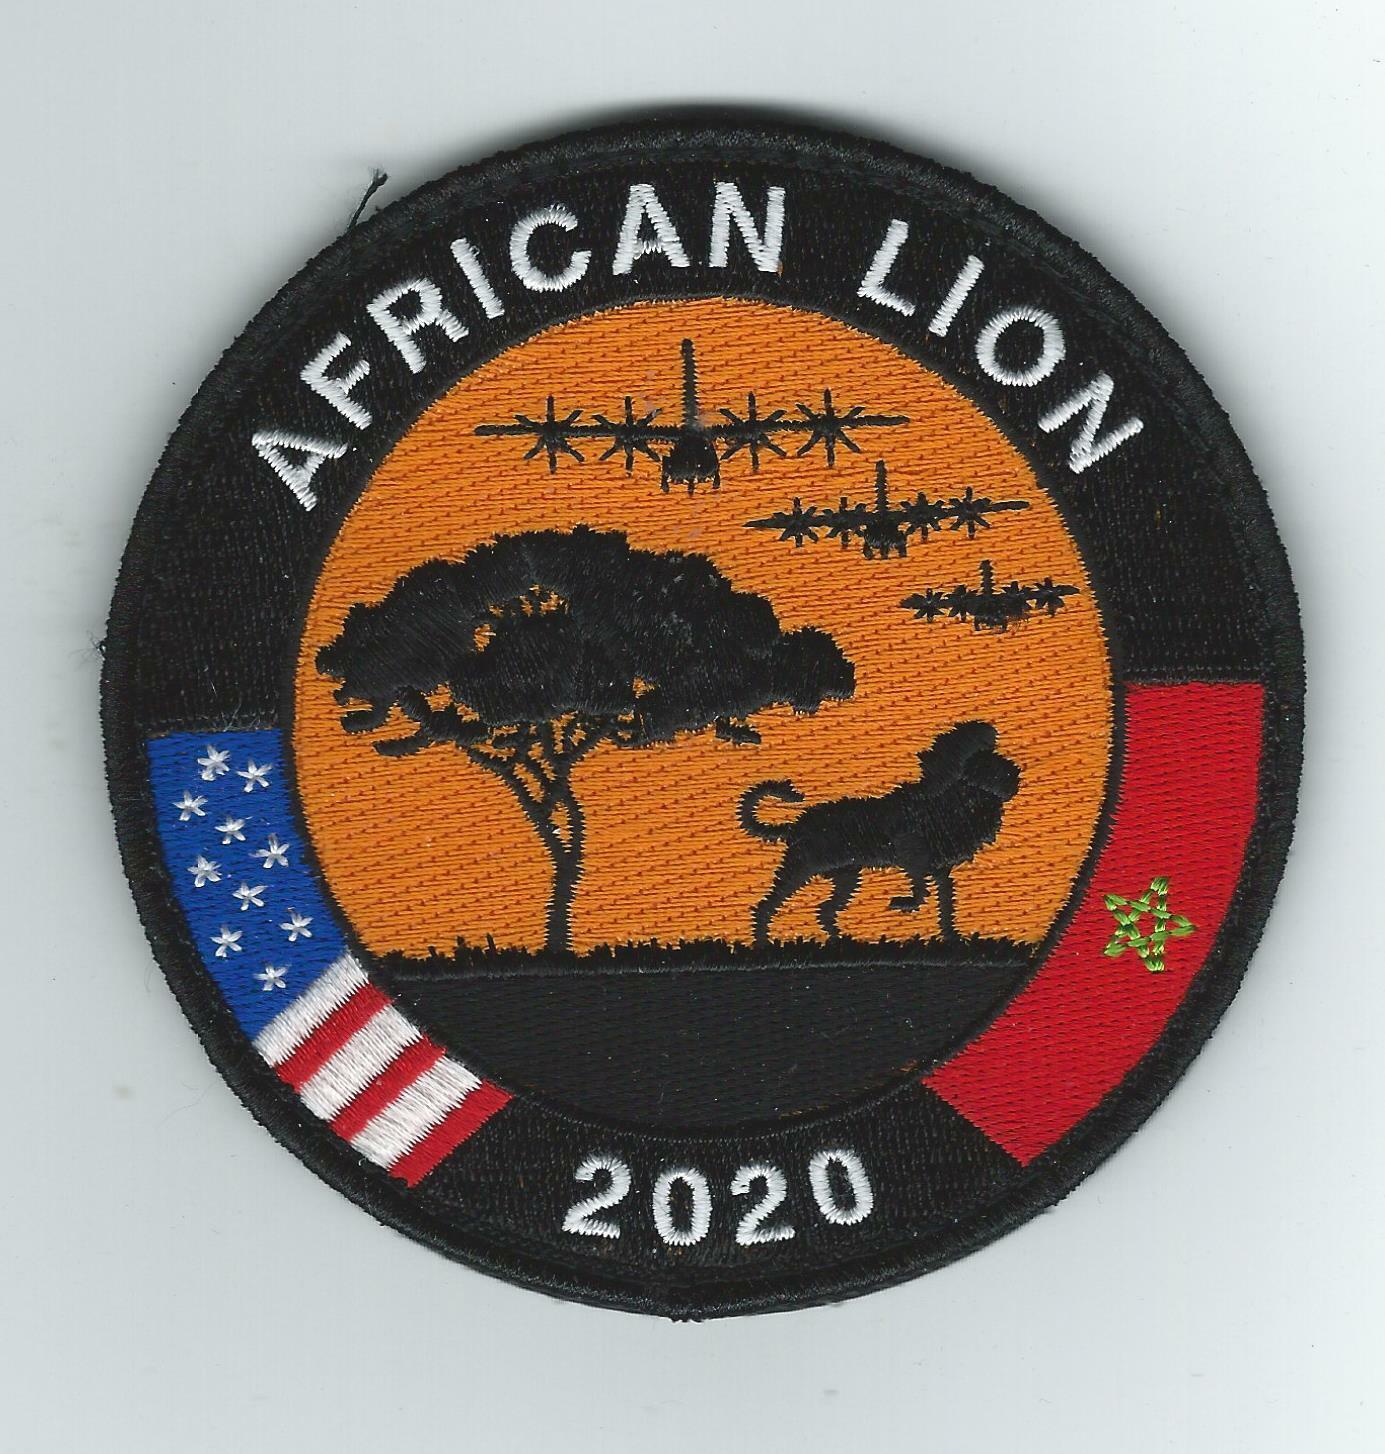 37th AIRLIFT SQUADRON "AFRICAN LION 2020" patch